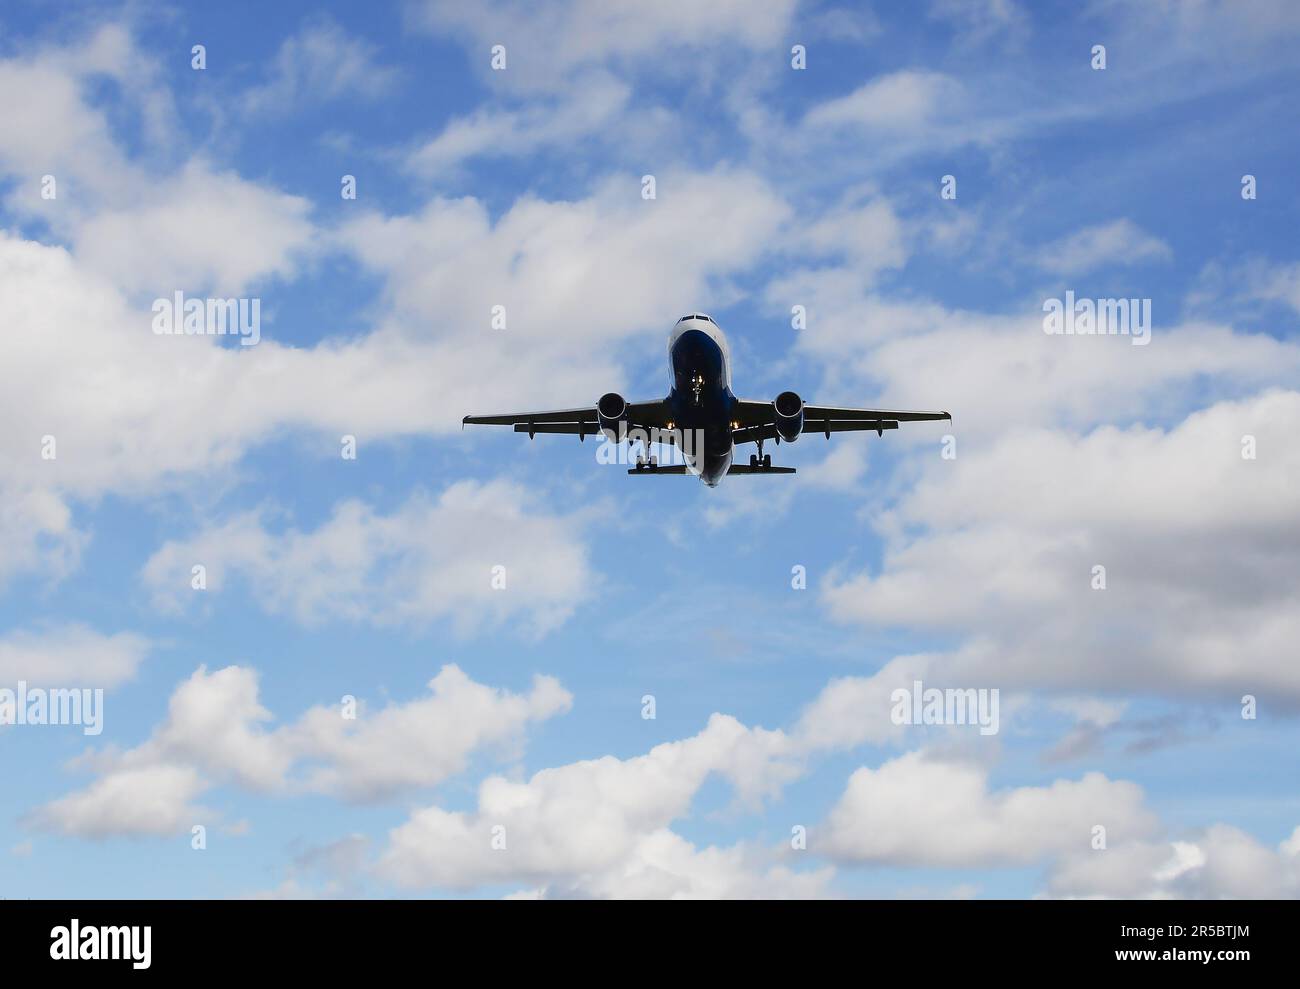 Beautiful background with a flying plane in the blue sky. Passenger aircraft with landing gear extended in the sky. Travel concept with copy space Stock Photo